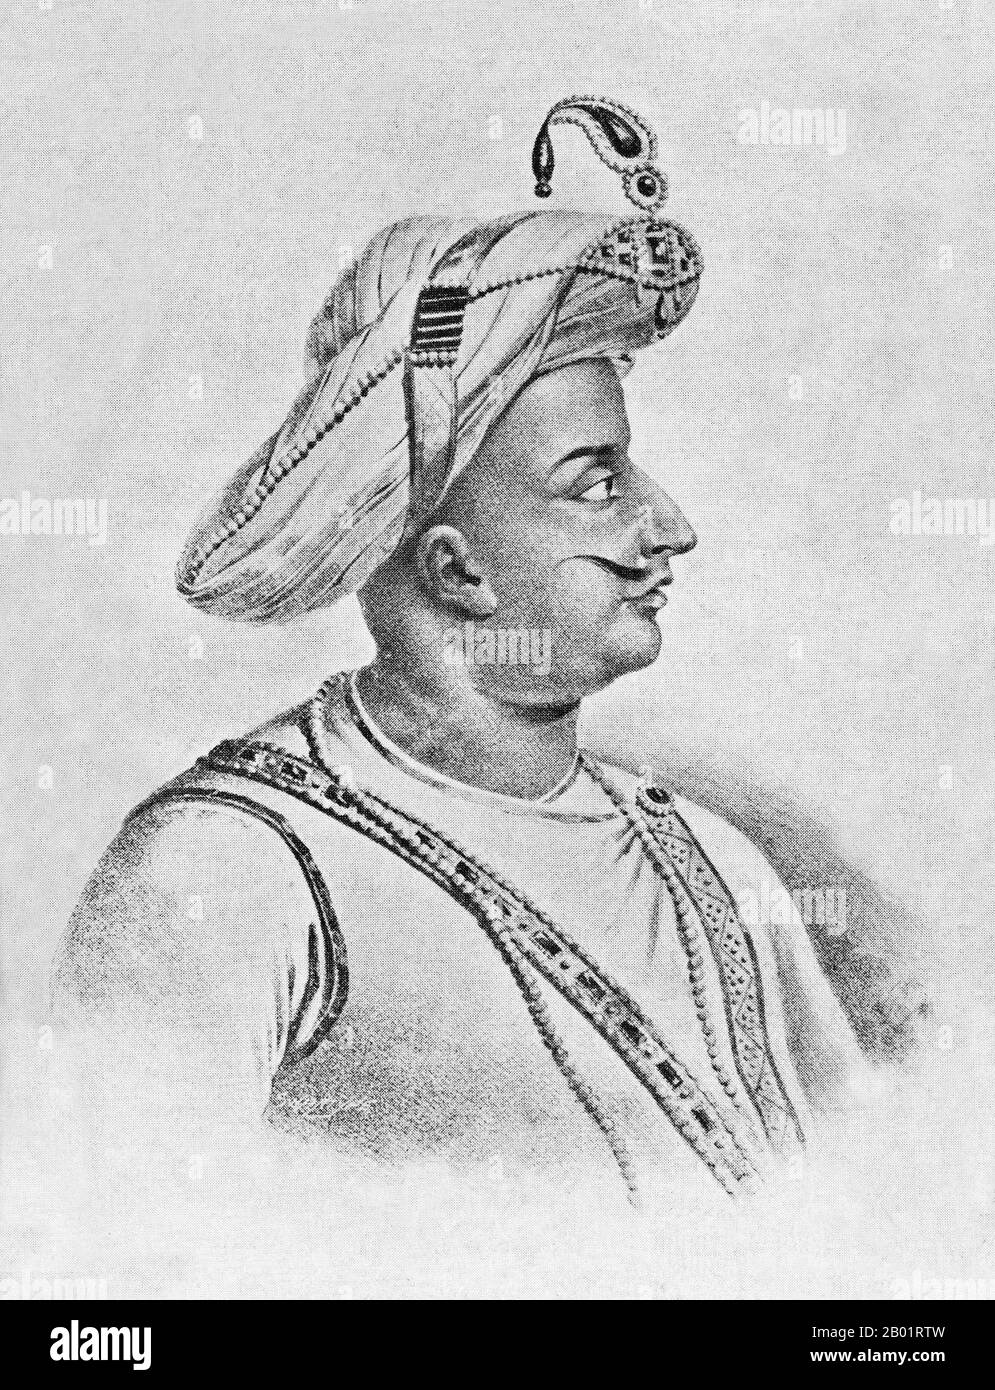 India: 'Tipu Sultan, Another View'. Sketch from C. Hayavadana Rao's 'History of Mysore, 1399 to 1799, volume III', 1792 (for sketch) and 1943 (for book).  Tipu Sultan (November 1750 - 4 May 1799), also known as the Tiger of Mysore, was the de facto ruler of the Kingdom of Mysore. He was the son of Hyder Ali, at that time an officer in the Mysorean army, and his second wife, Fatima or Fakhr-un-Nissa. He was given a number of honorific titles, and was referred to as Sultan Fateh Ali Khan Shahab, Tipu Saheb, Bahadur Khan Tipu Sultan or Fatih Ali Khan Tipu Sultan Bahadur. Stock Photo